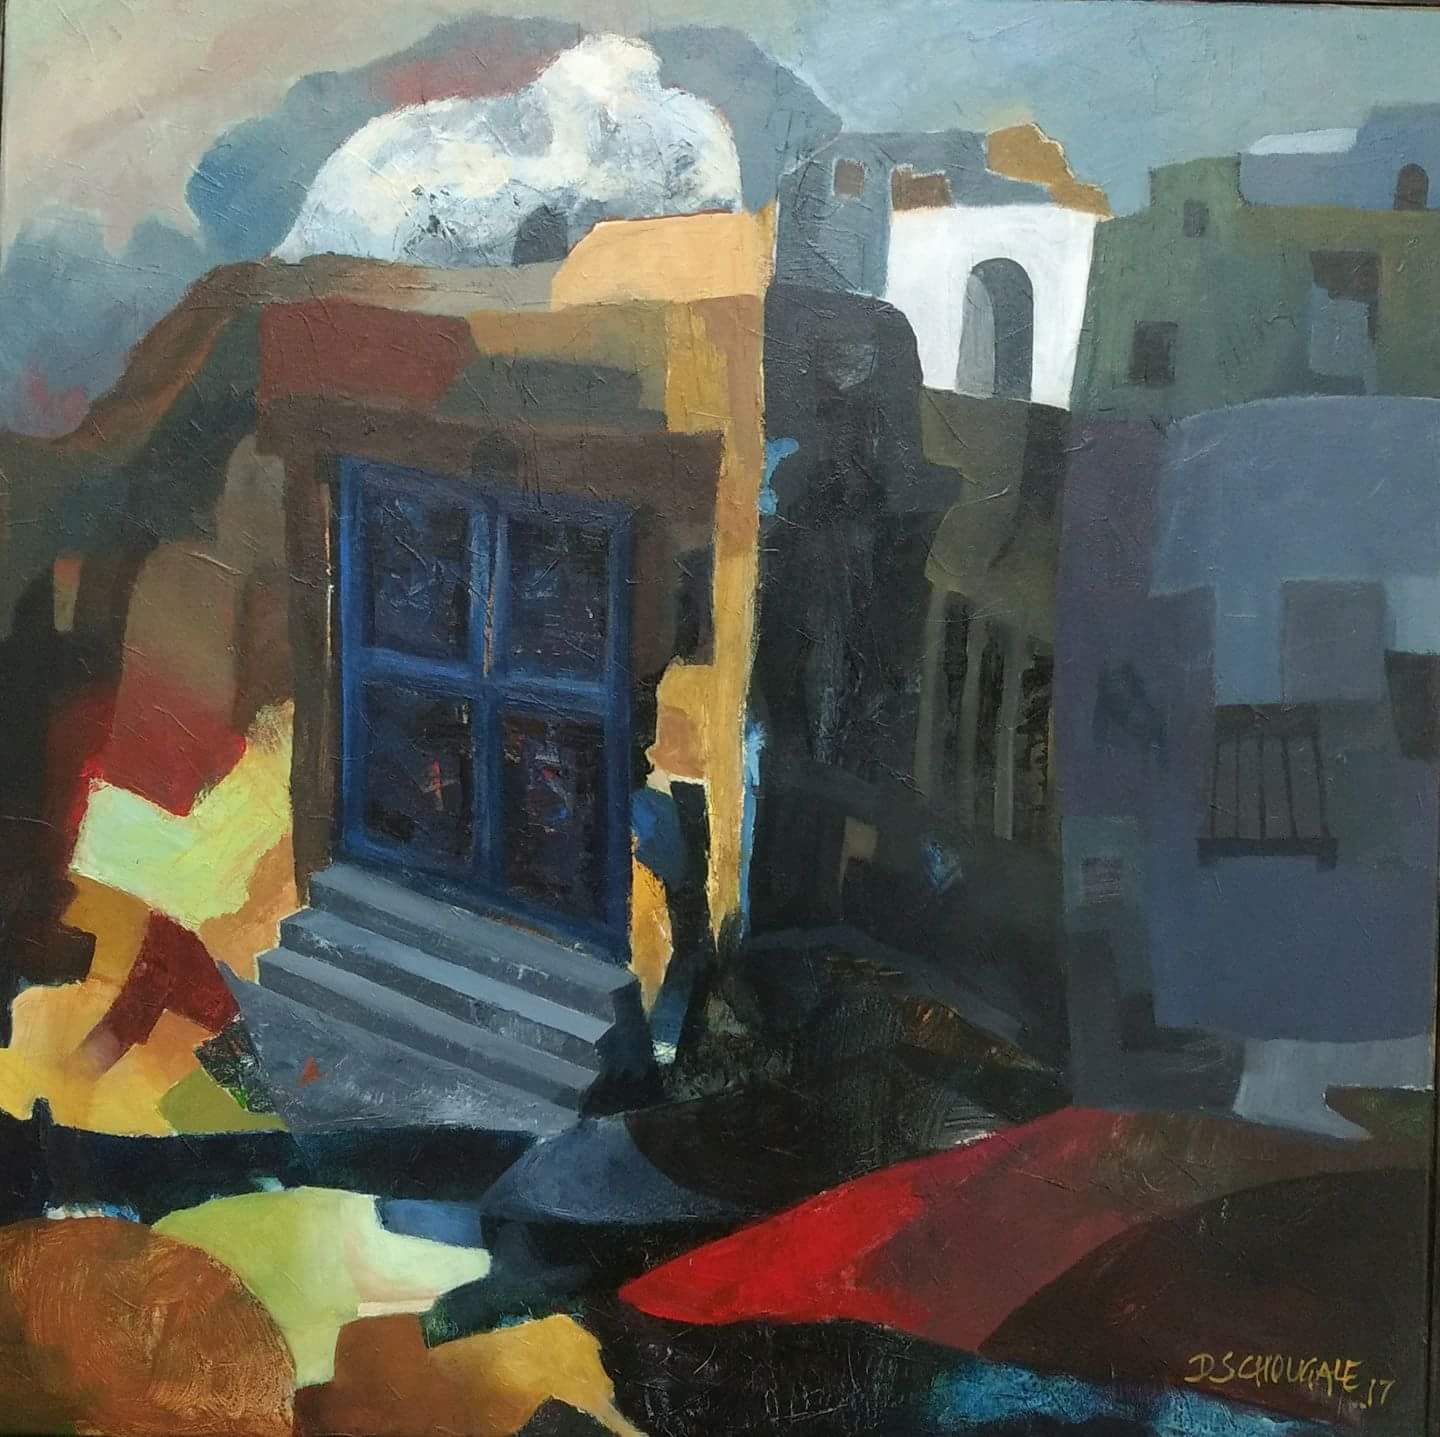 Abstract Painting with Oil on Canvas "Village" art by Dr D S Chougale